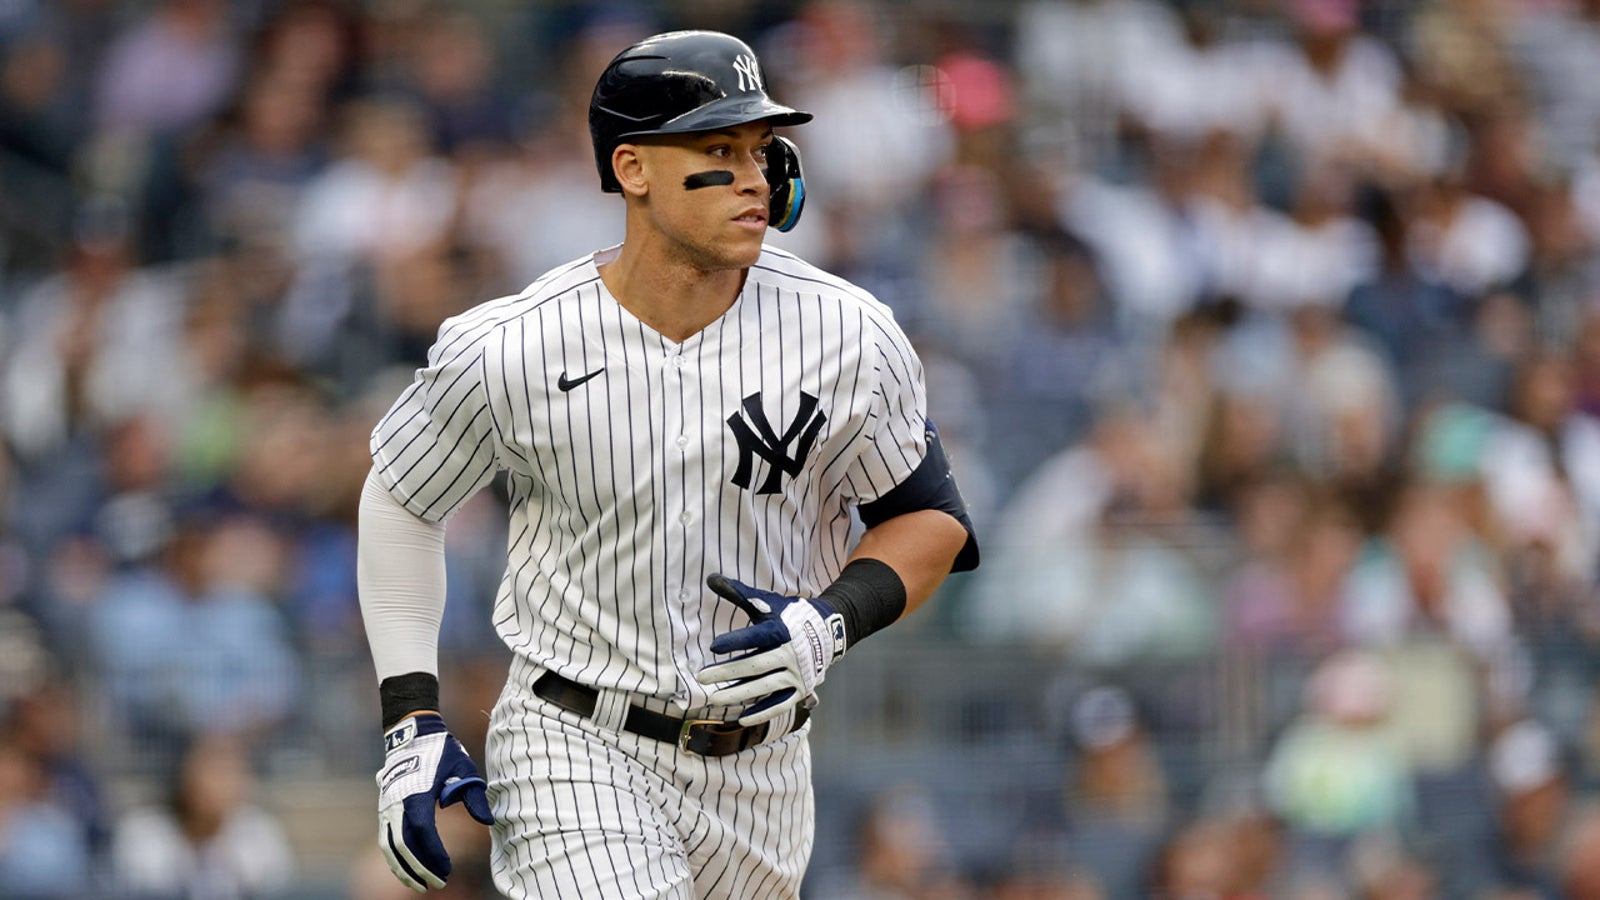 Ken Rosenthal provides an update on Aaron Judge's contract extension